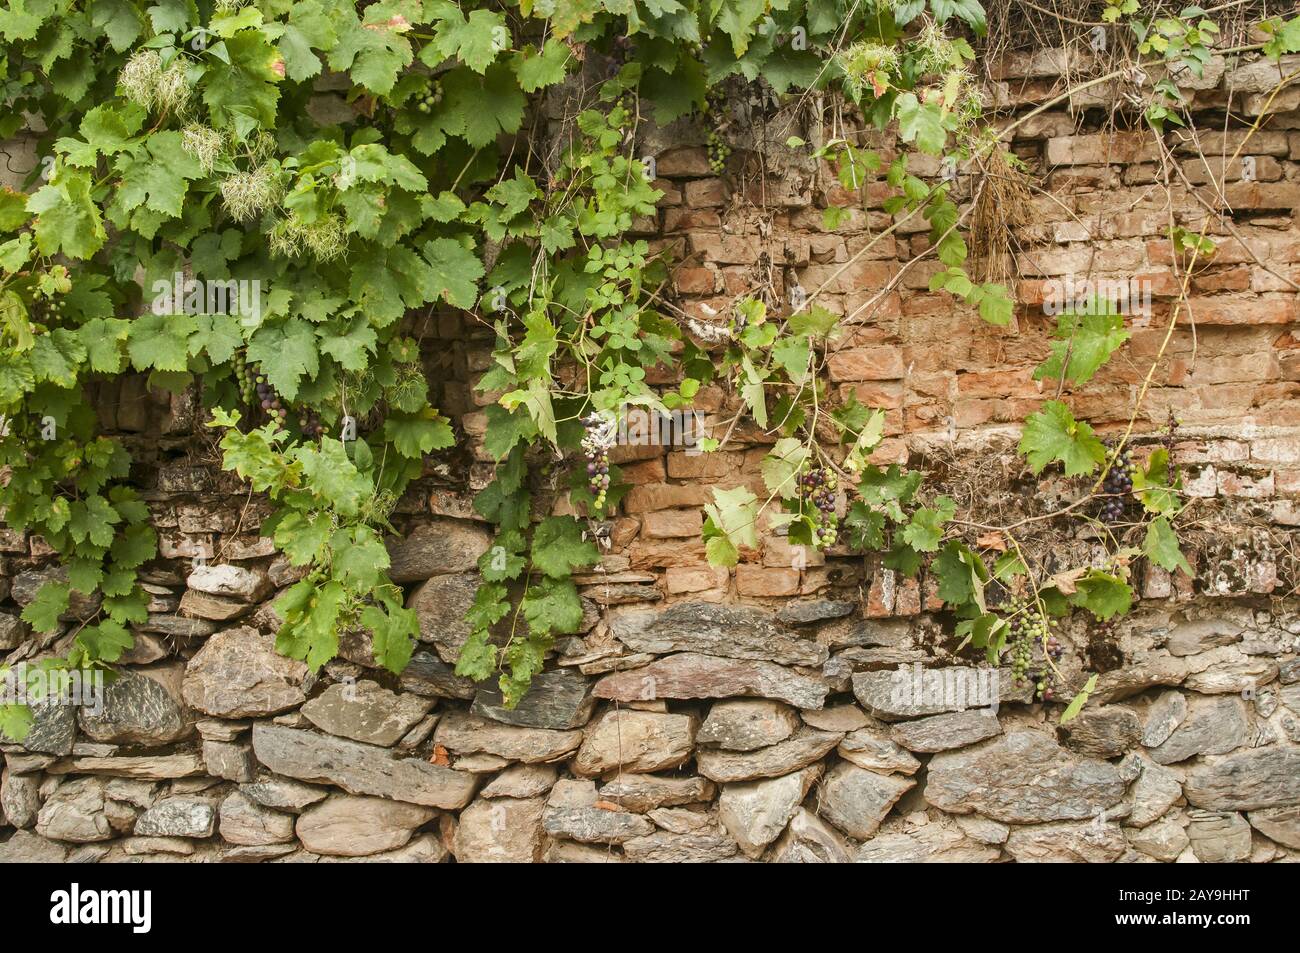 Old rural weathered aged stone and brick of country house garden wall with creeping plants closeup Stock Photo